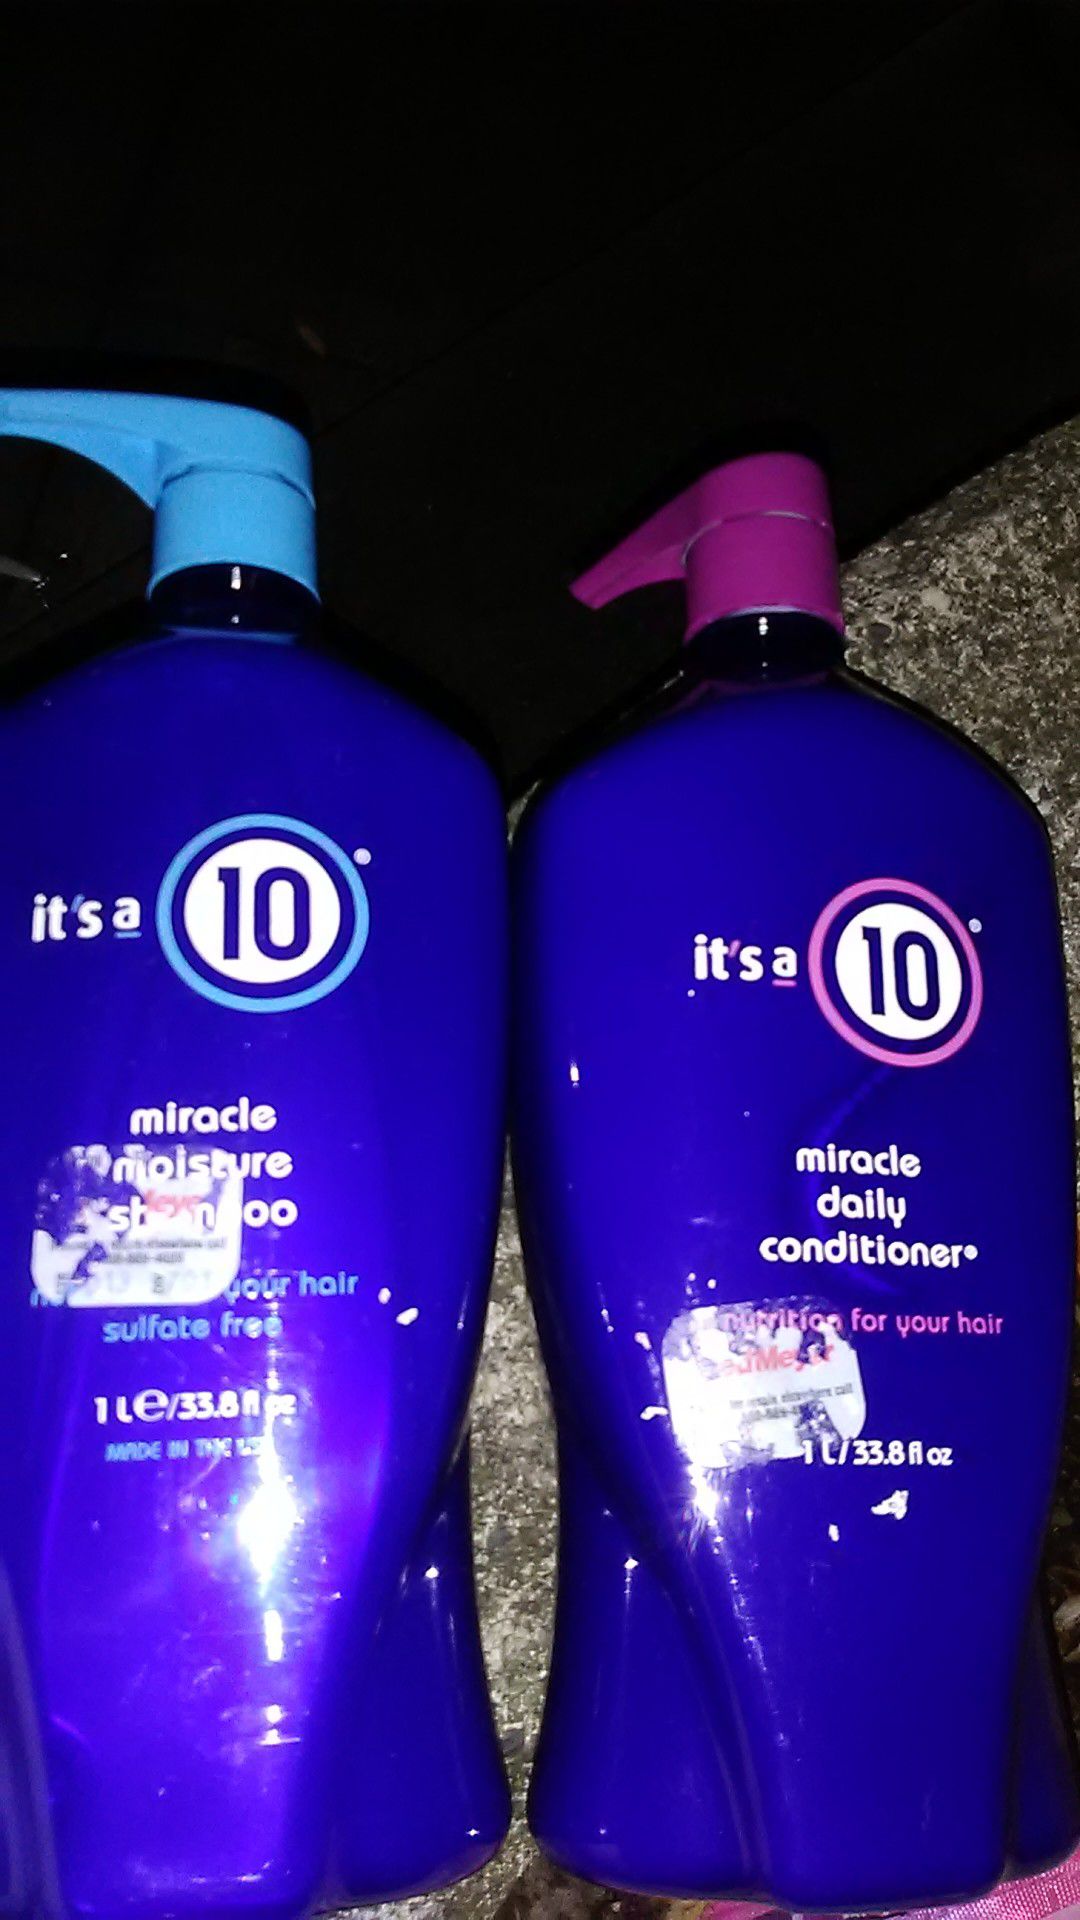 It's a 10 miracle moisture shampoo in conditioner 33.8 oz bottles